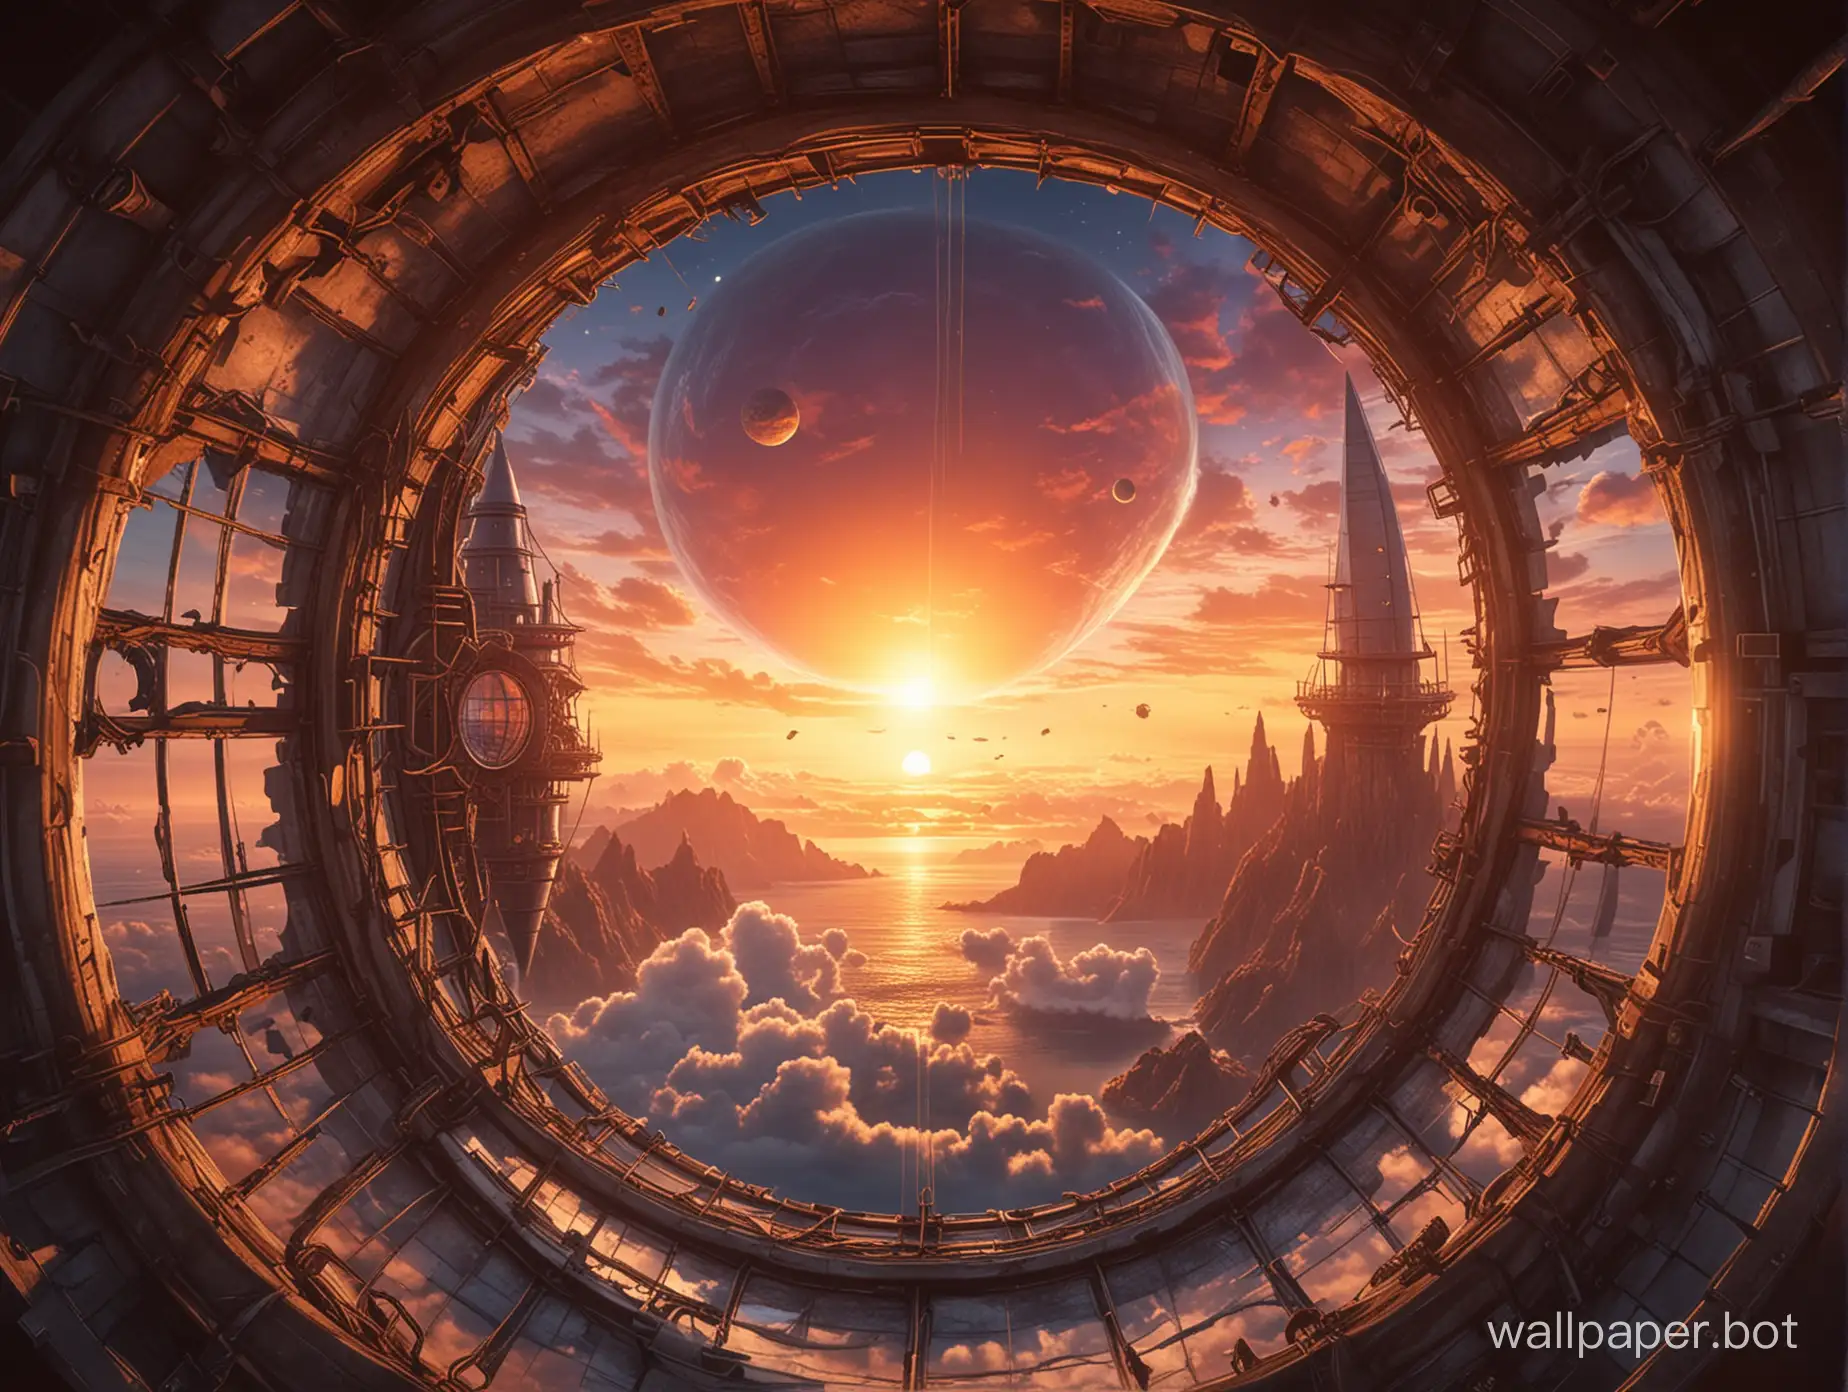 A narrow window into a fantastic space with a planet. fantastic tower against sunset background. There is an airship with sails in the sky. High resolution. Very definition. sci-fi. Anime. Steampunk.